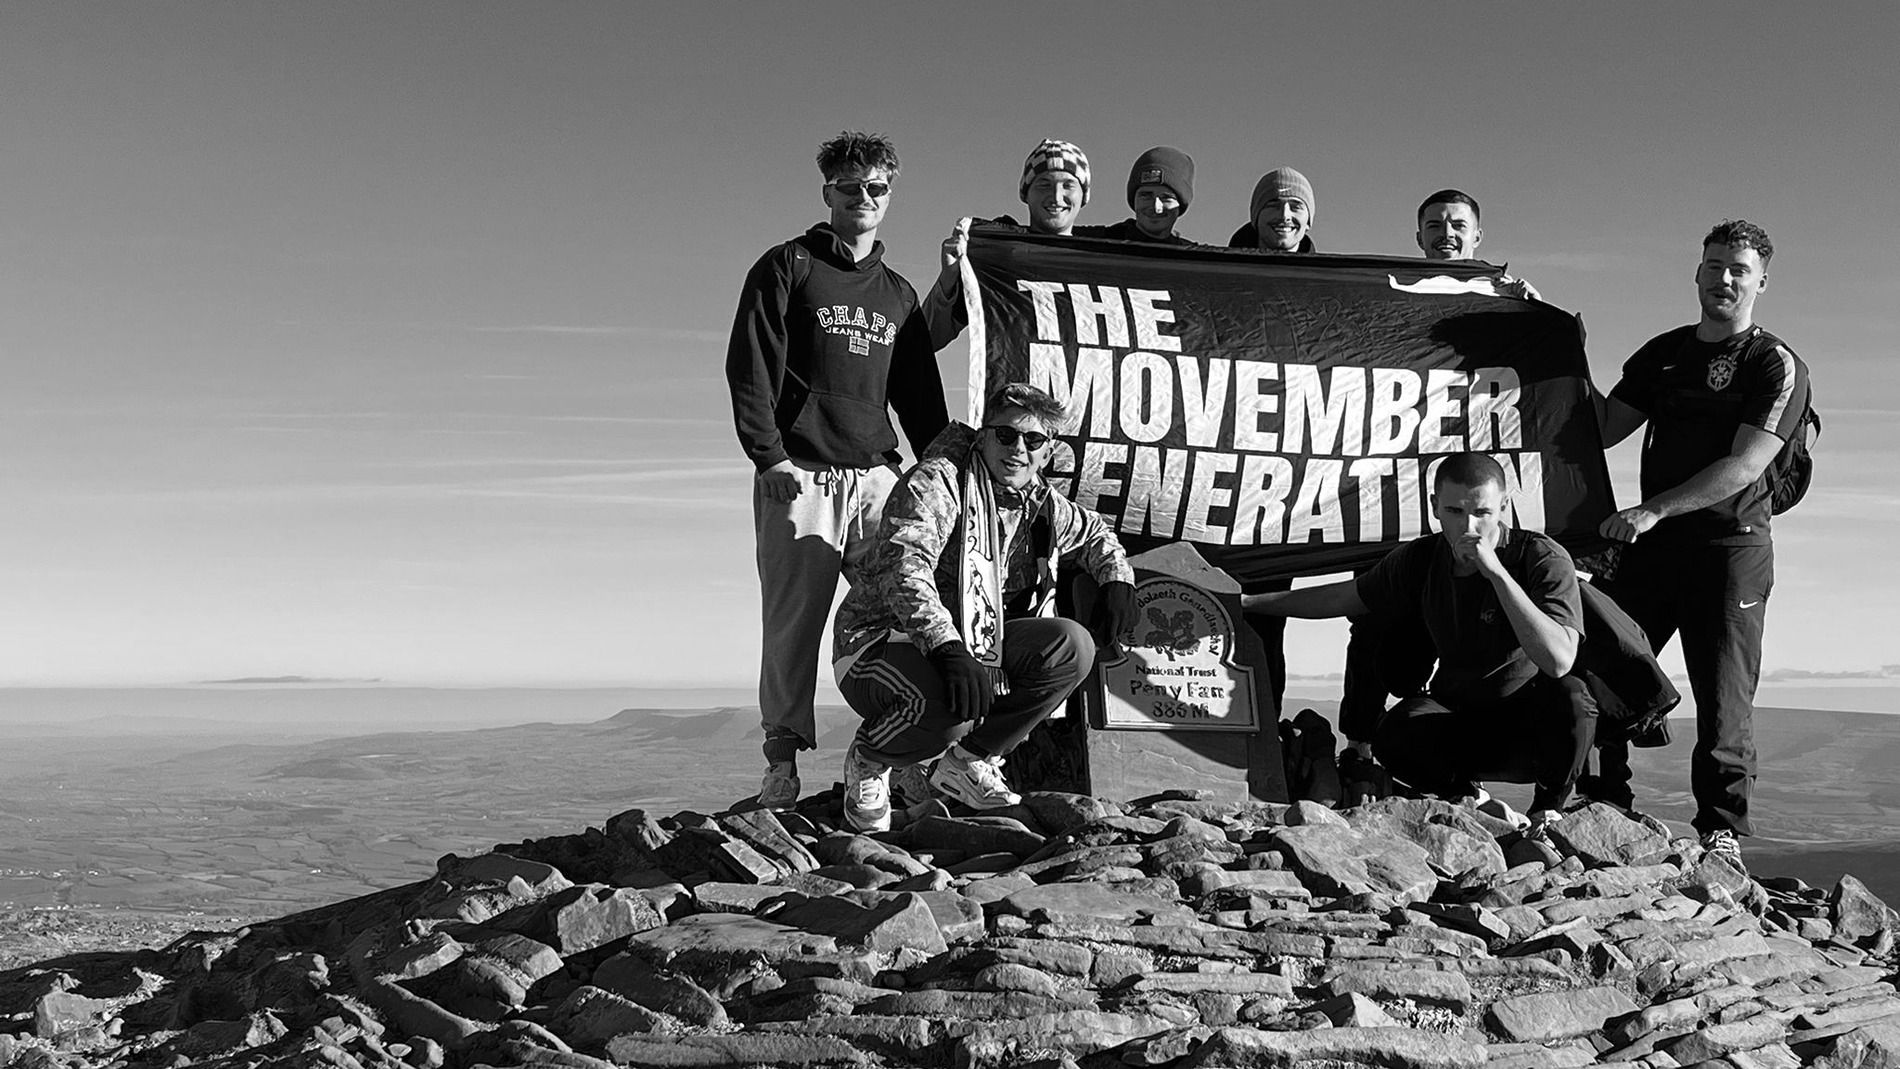 Students at the top of Pen-y-fam with Movember flag